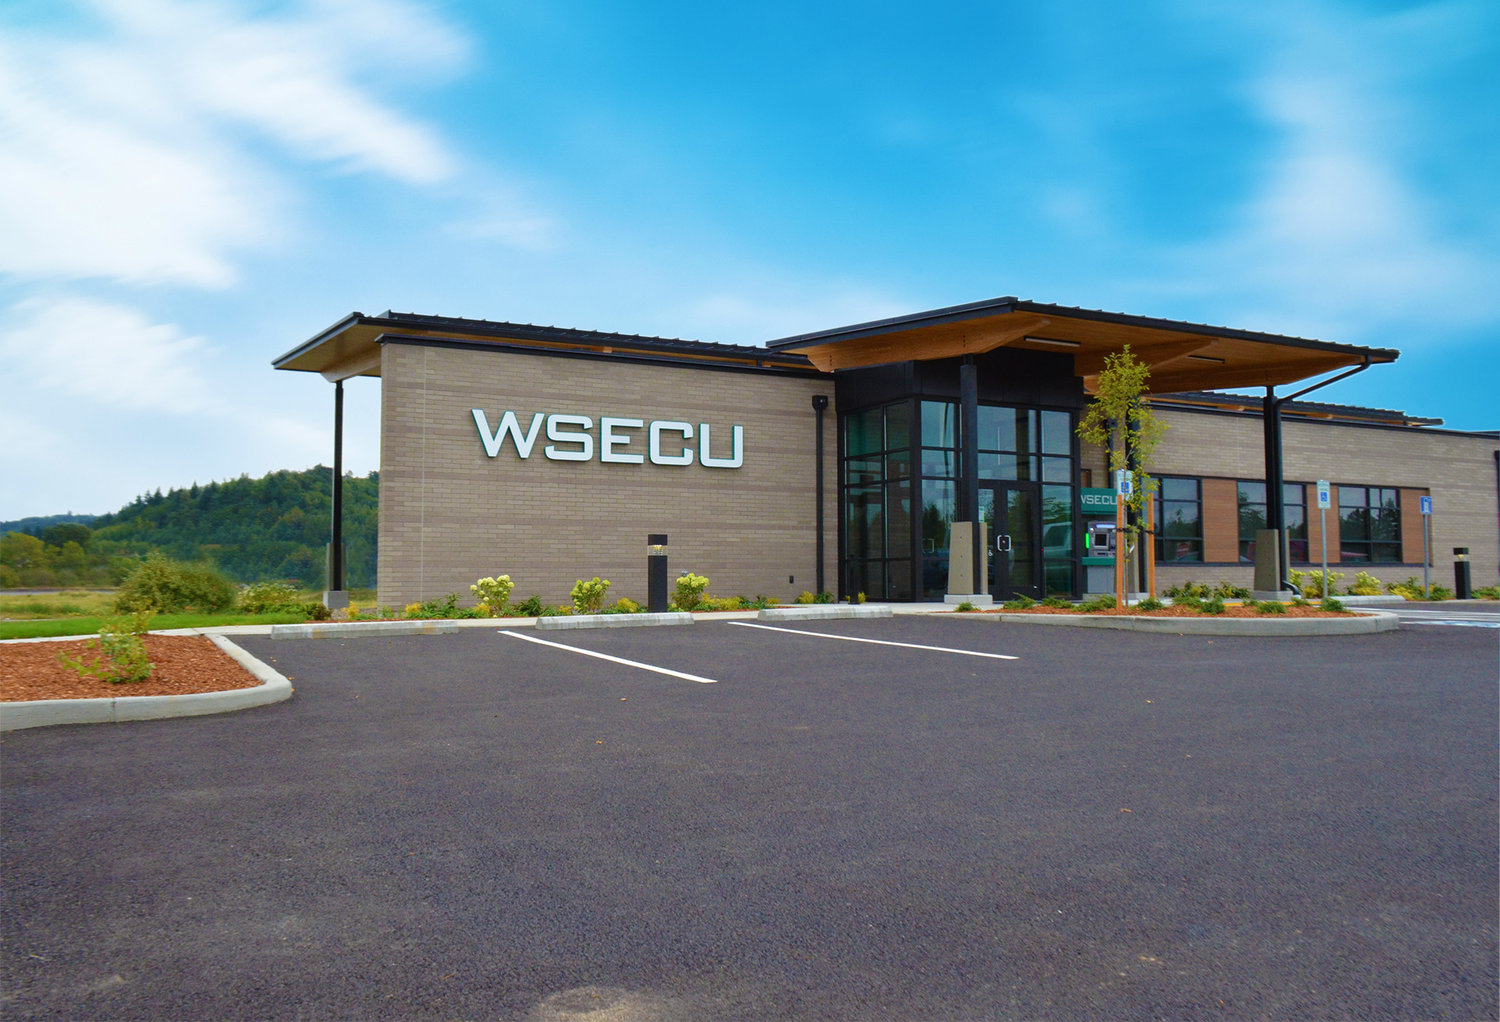 The celebration will be held from 11 a.m. to 2 pm Dec. 9 at the WSECU Chehalis branch located at 1725 NW Louisiana Ave. 